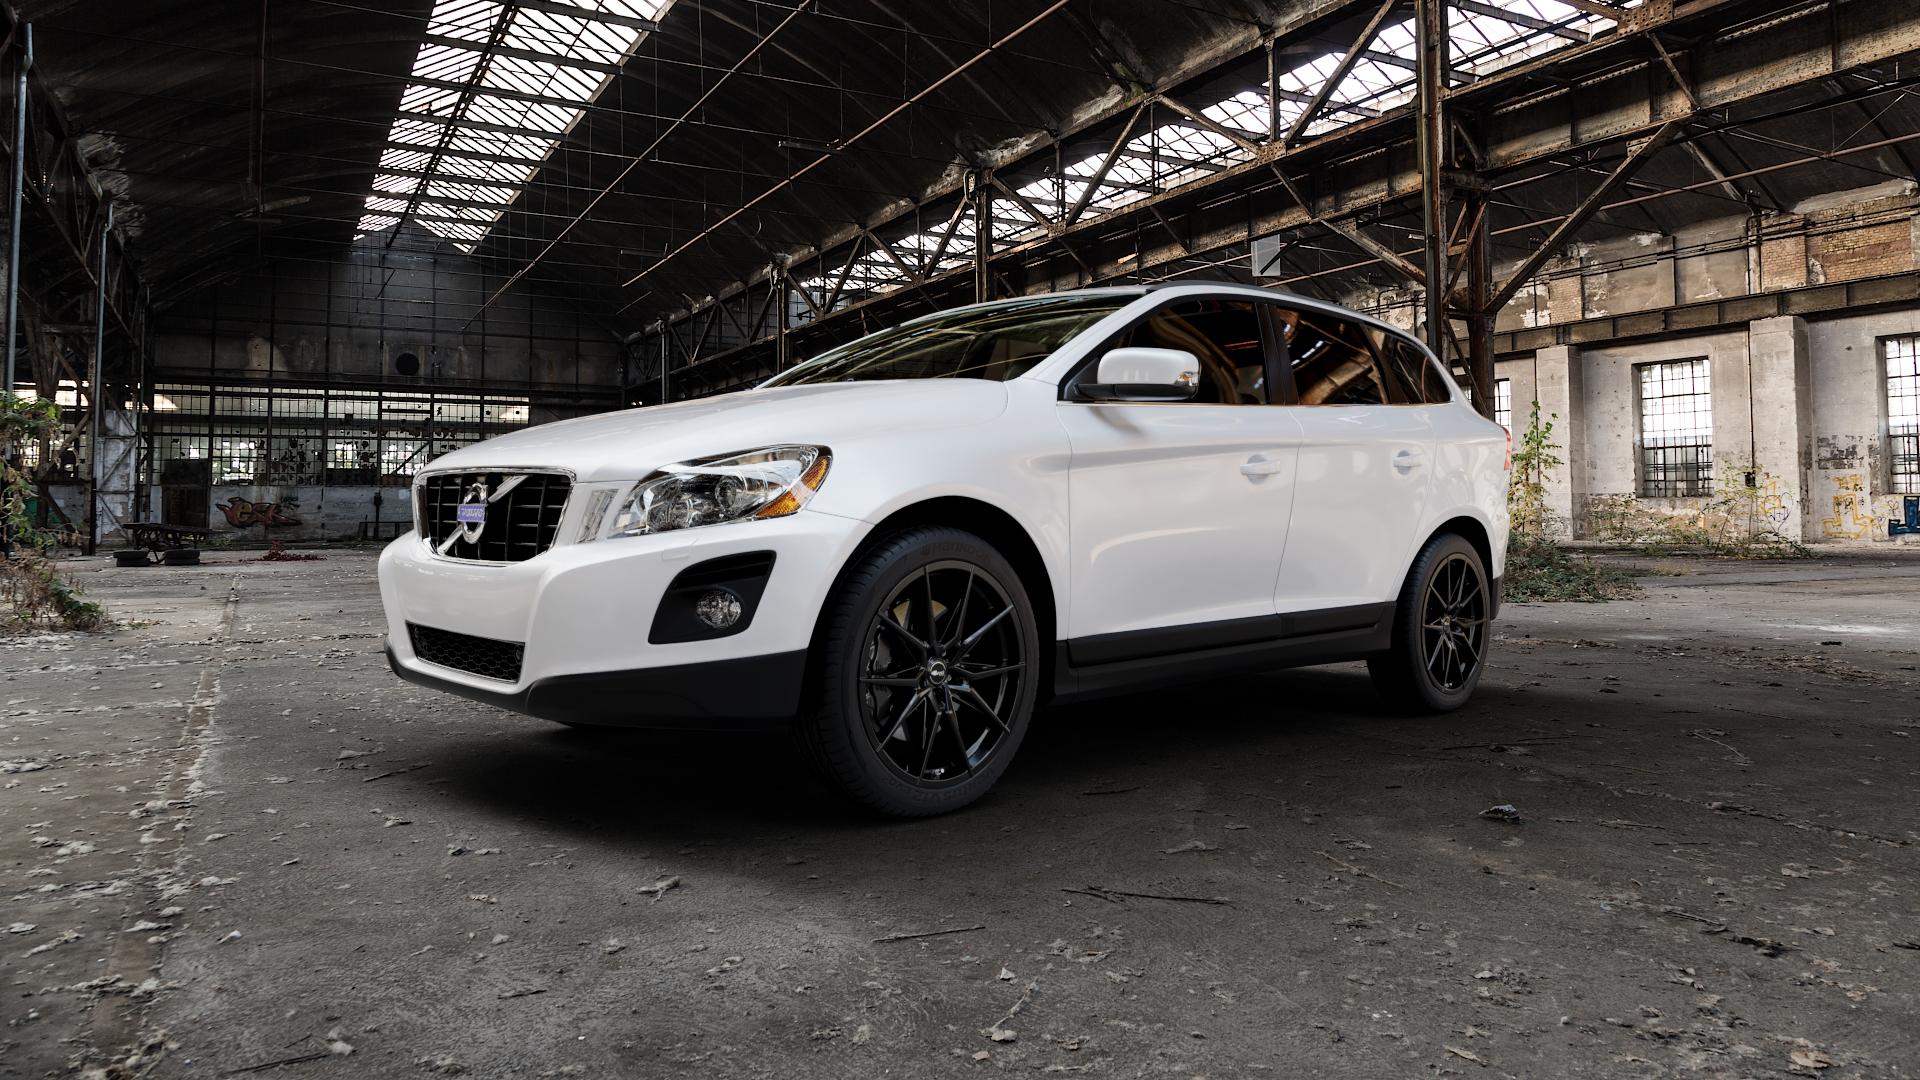 Volvo XC60 Type D 2,4l D 129kW (175 hp) Wheels and Tyre Packages